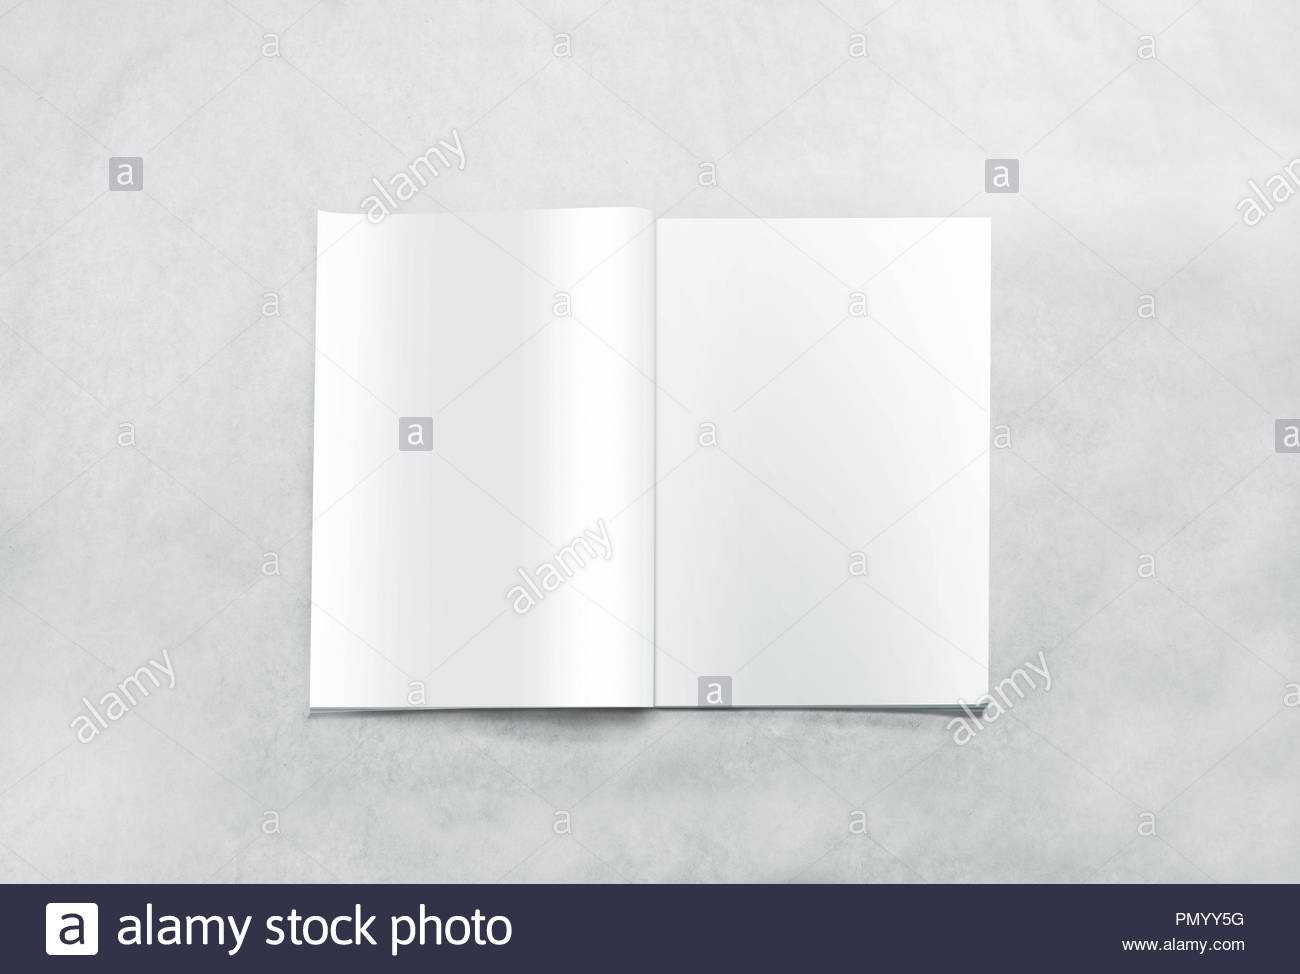 Opened Blank Magazine Pages Mockup, Isolated On Textured For Blank Magazine Spread Template